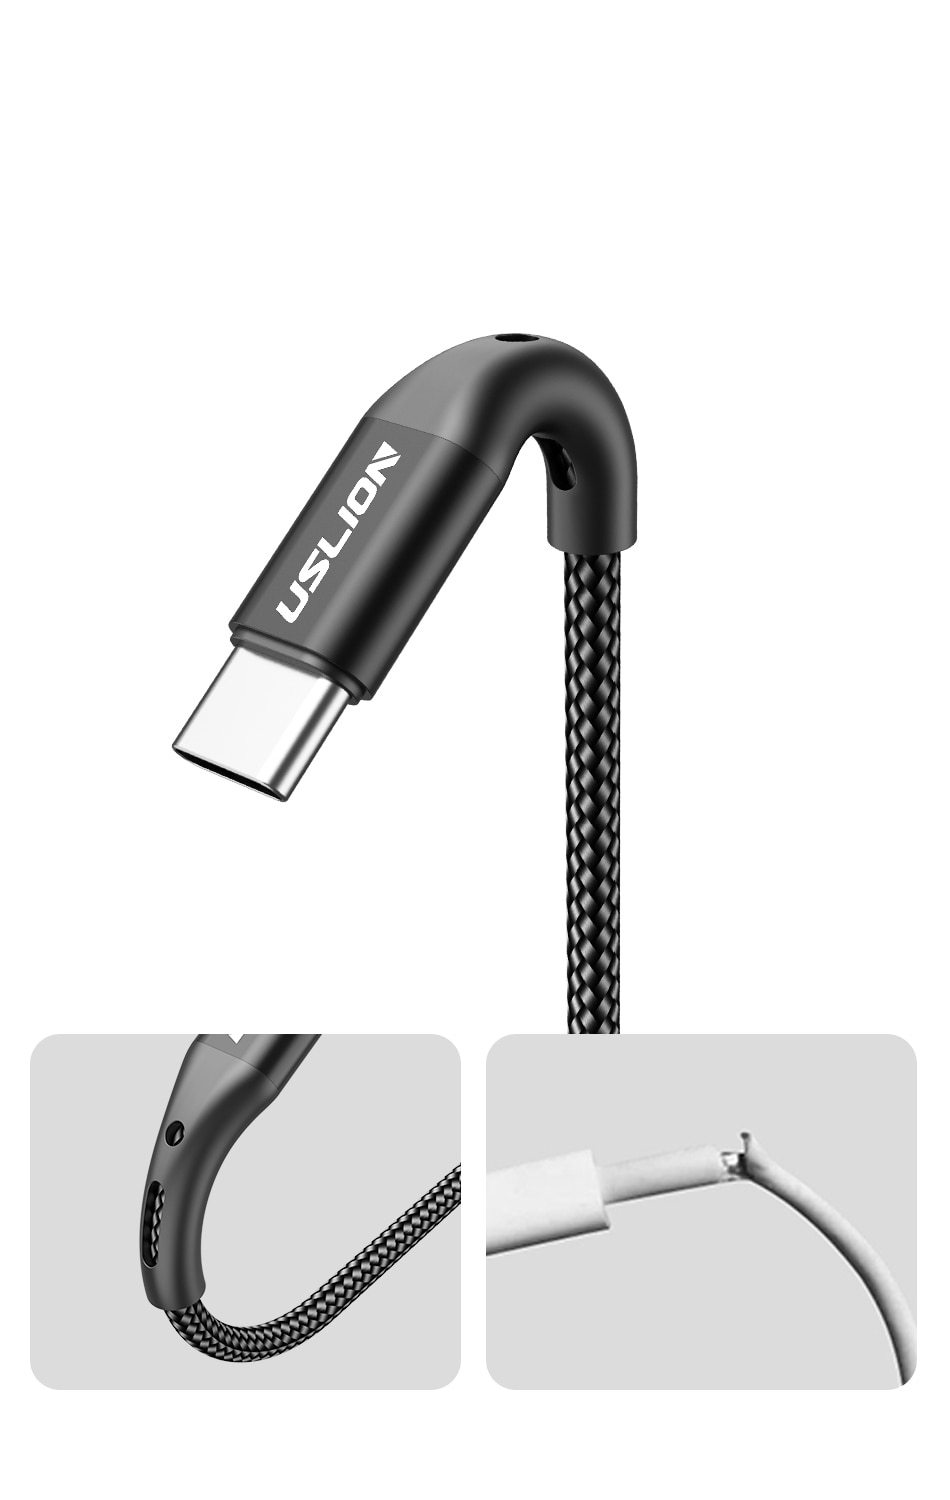 3A Type C USB Charging Cables